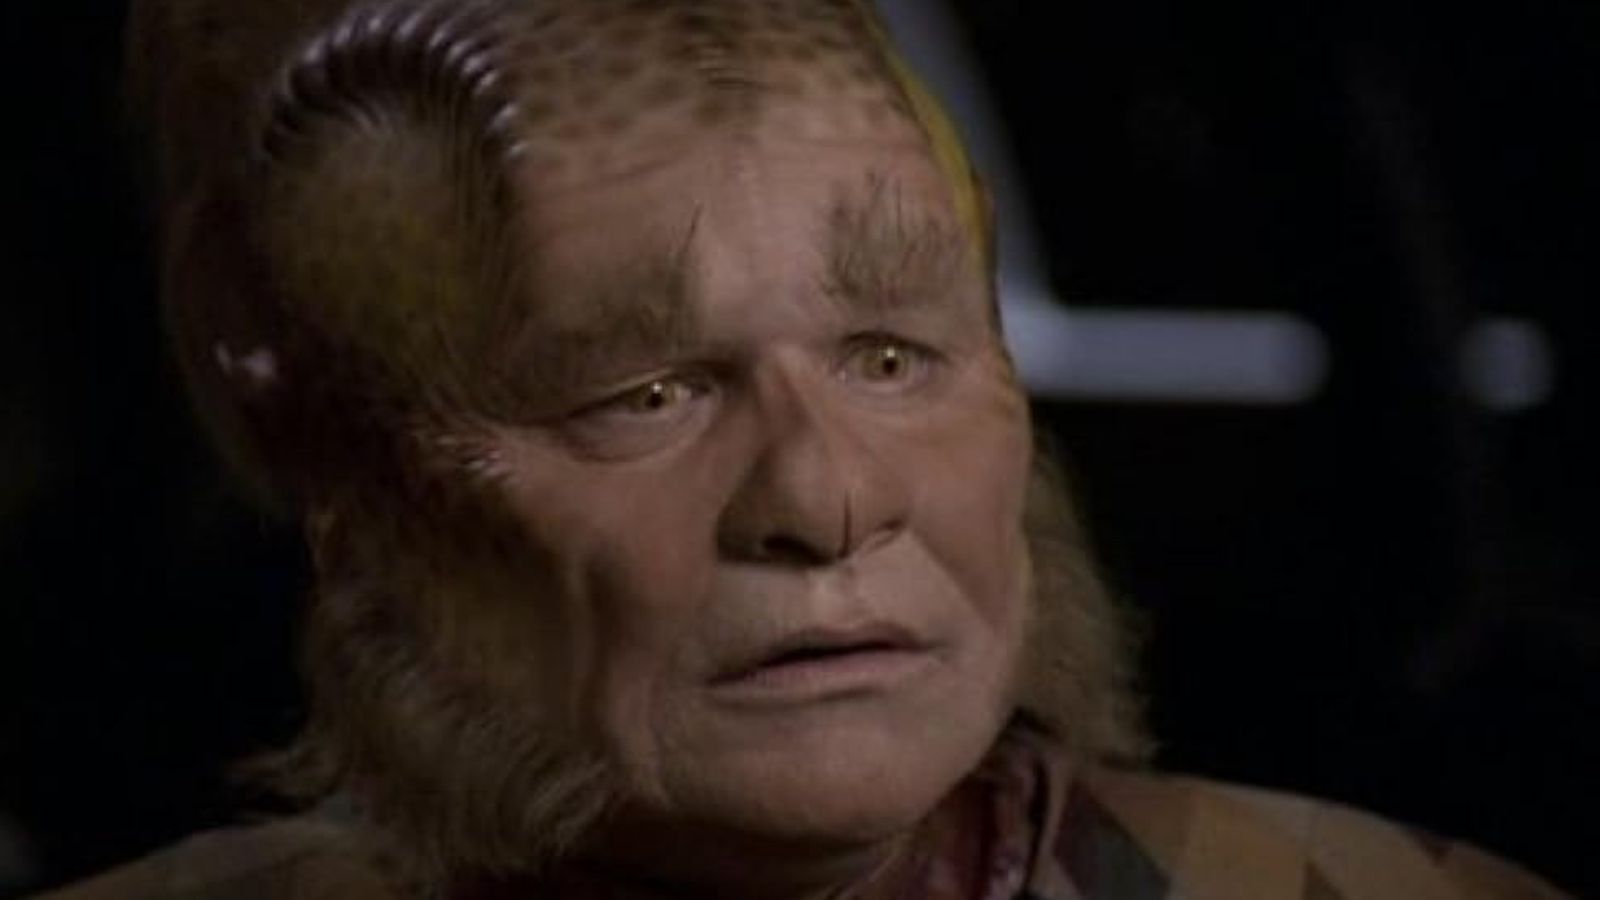 <span>From dodgy prosthetics to fake foreheads and people painted green, sometimes the make-up and costume departments severely missed the mark, and it’s okay to admit that some of the </span><a class="editor-rtfLink" href="https://screenrant.com/star-trek-outfits-costumes-best-worst/" rel="noopener"><span>costumes on Star Trek</span></a><span> were not great. </span>